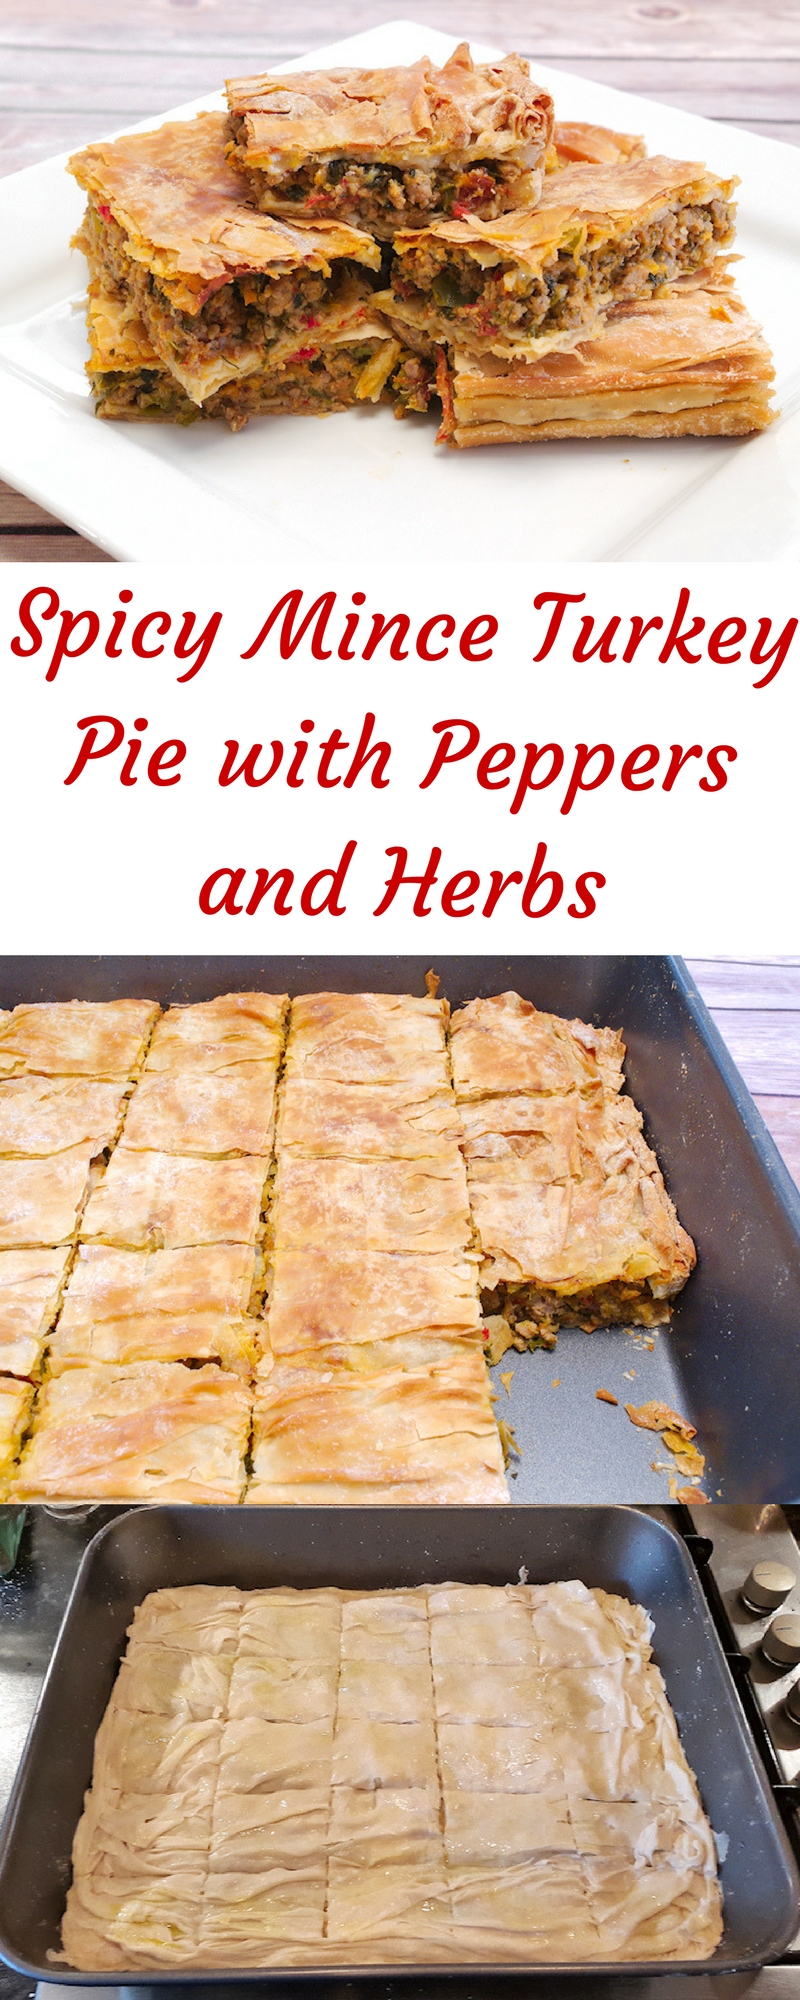 Spicy Turkey Pie with Peppers and Herbs